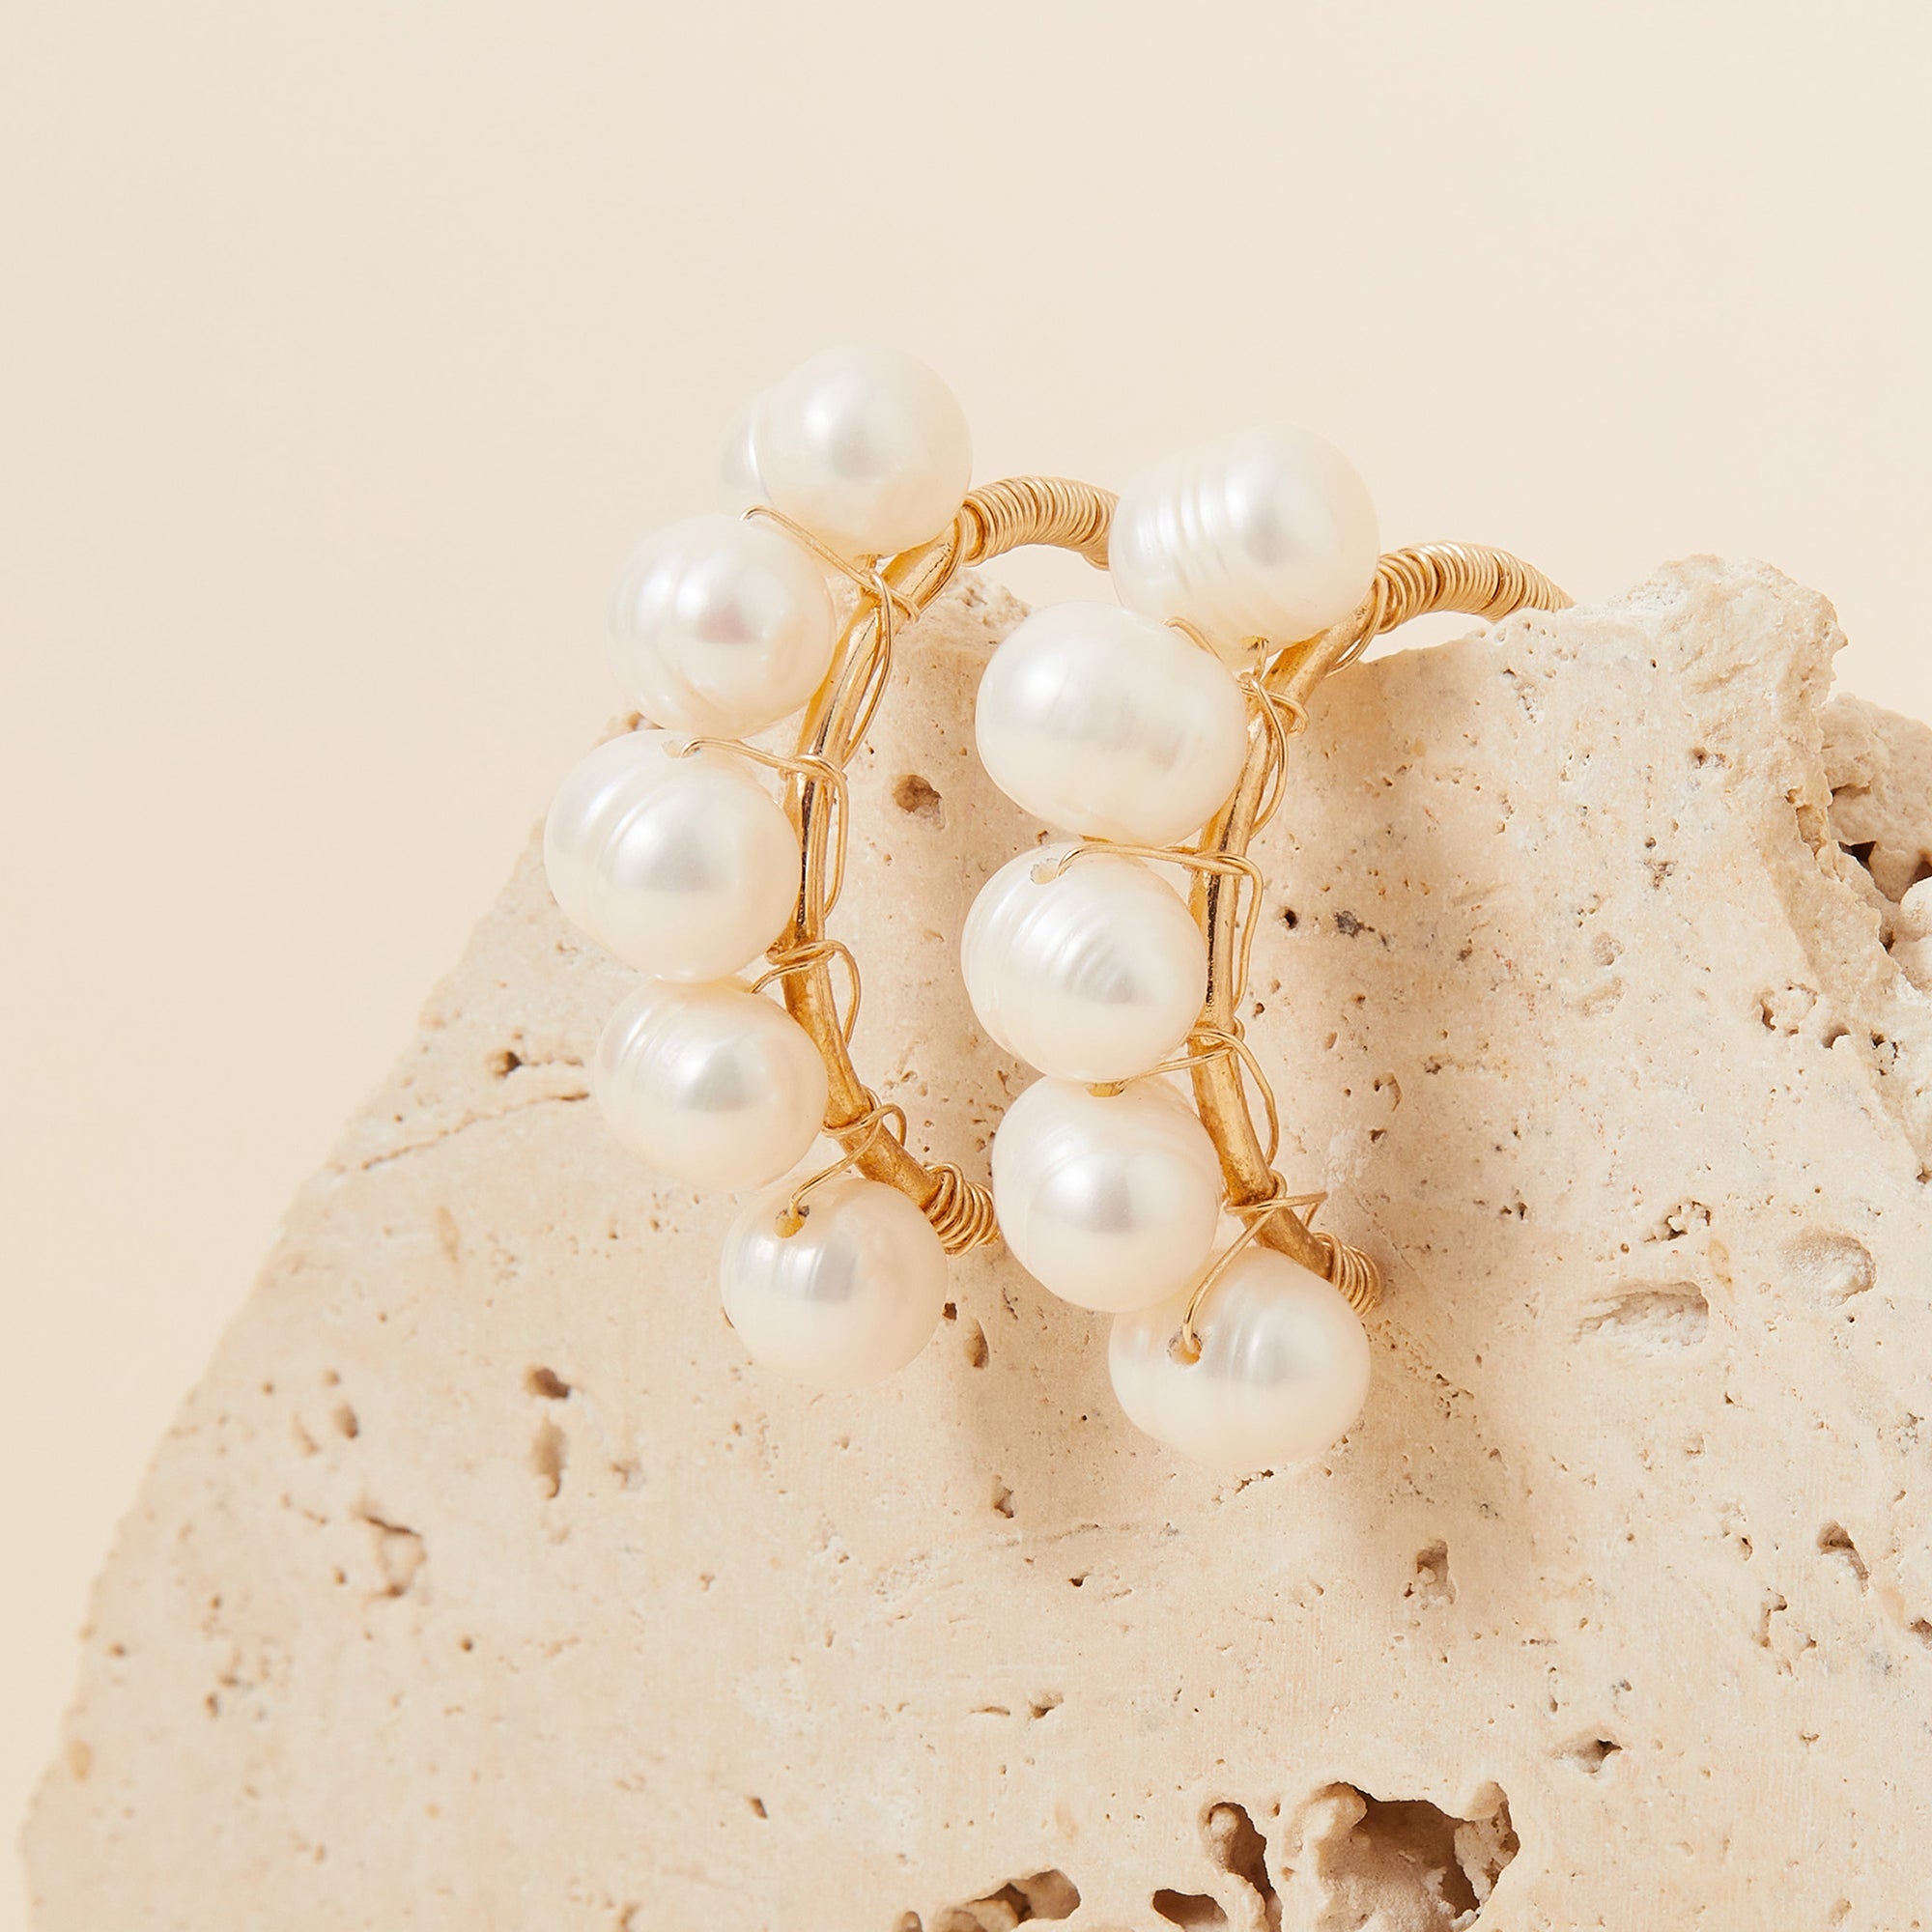 Buy Pearl Hoop Earrings in Sterling Silver Plated With 9 Carat Gold, Large  Gold Hoops, White Baroque Pearls, Boho Beach Wedding, 30th Birthday Online  in India - Etsy